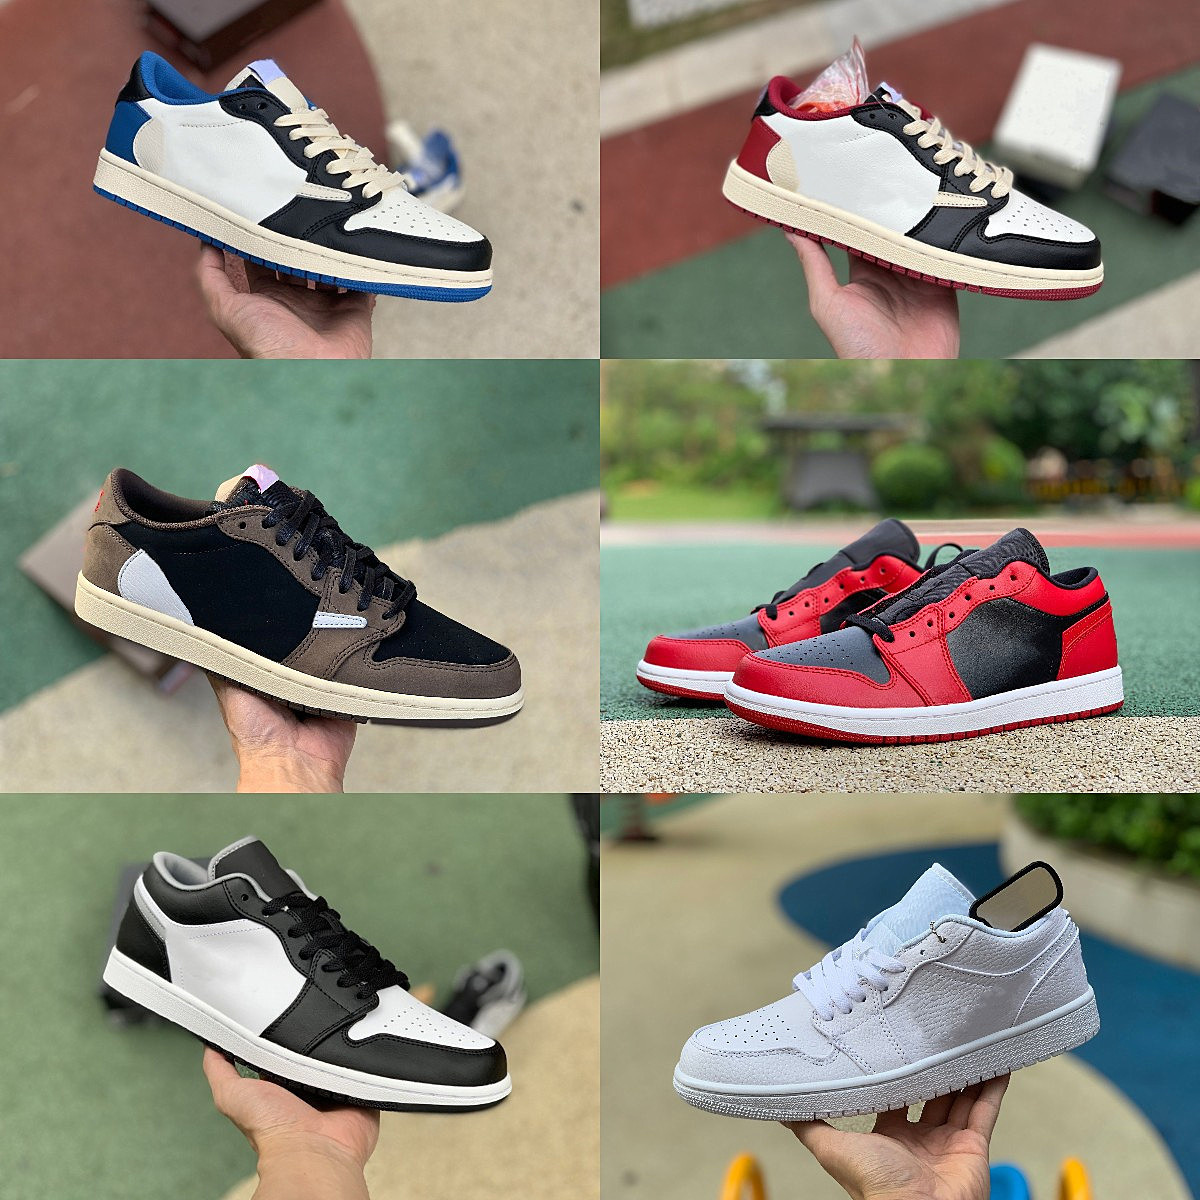 

Designers 1 Low Casual Basketball Shoes Jumpman Mens 1S Fragment White Brown Red Gold Banned UNC Wolf Grey Silver Toe Black Toe Shadow Trainer Brand Sports Sneakers, Please contact us